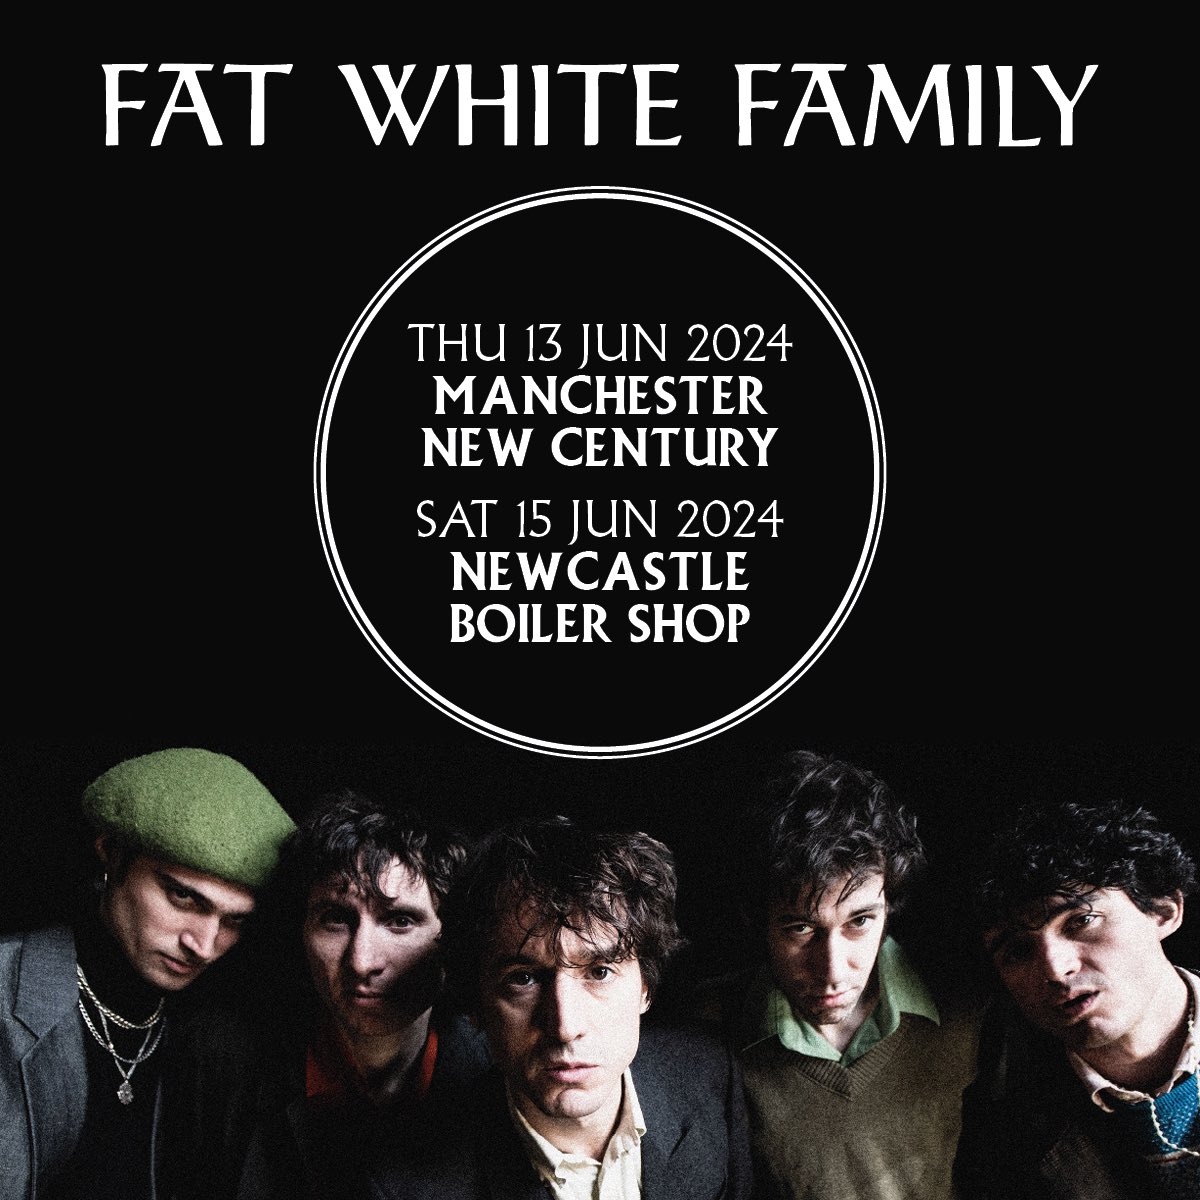 We’re counting down every minute until @FatWhiteFamily return on Saturday 15 June: bit.ly/3T2TJFx   We’re so excited to see them perform their new album, ‘Forgiveness Is Yours’ - released to the world today - along with their loaded backlog.